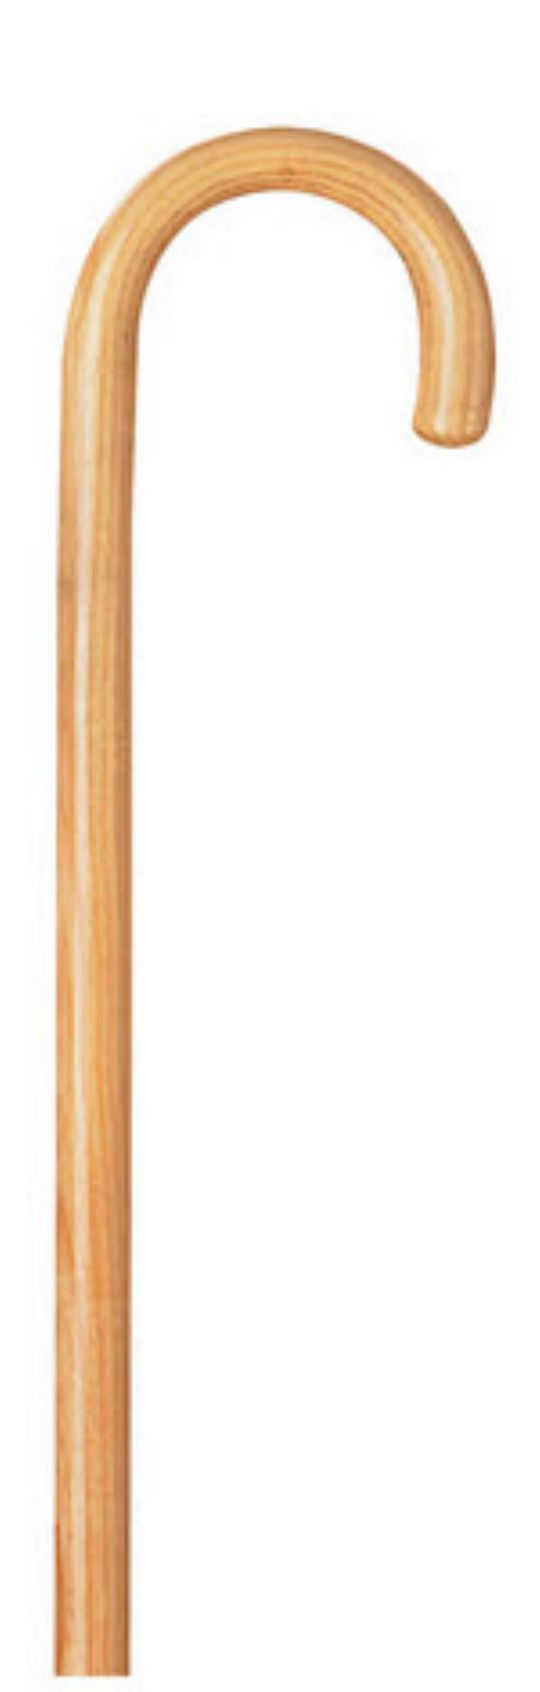 Carex Round Handle Wood Cane for All Occasions, Natural Ash Finish, 250 lb  Weight Capacity